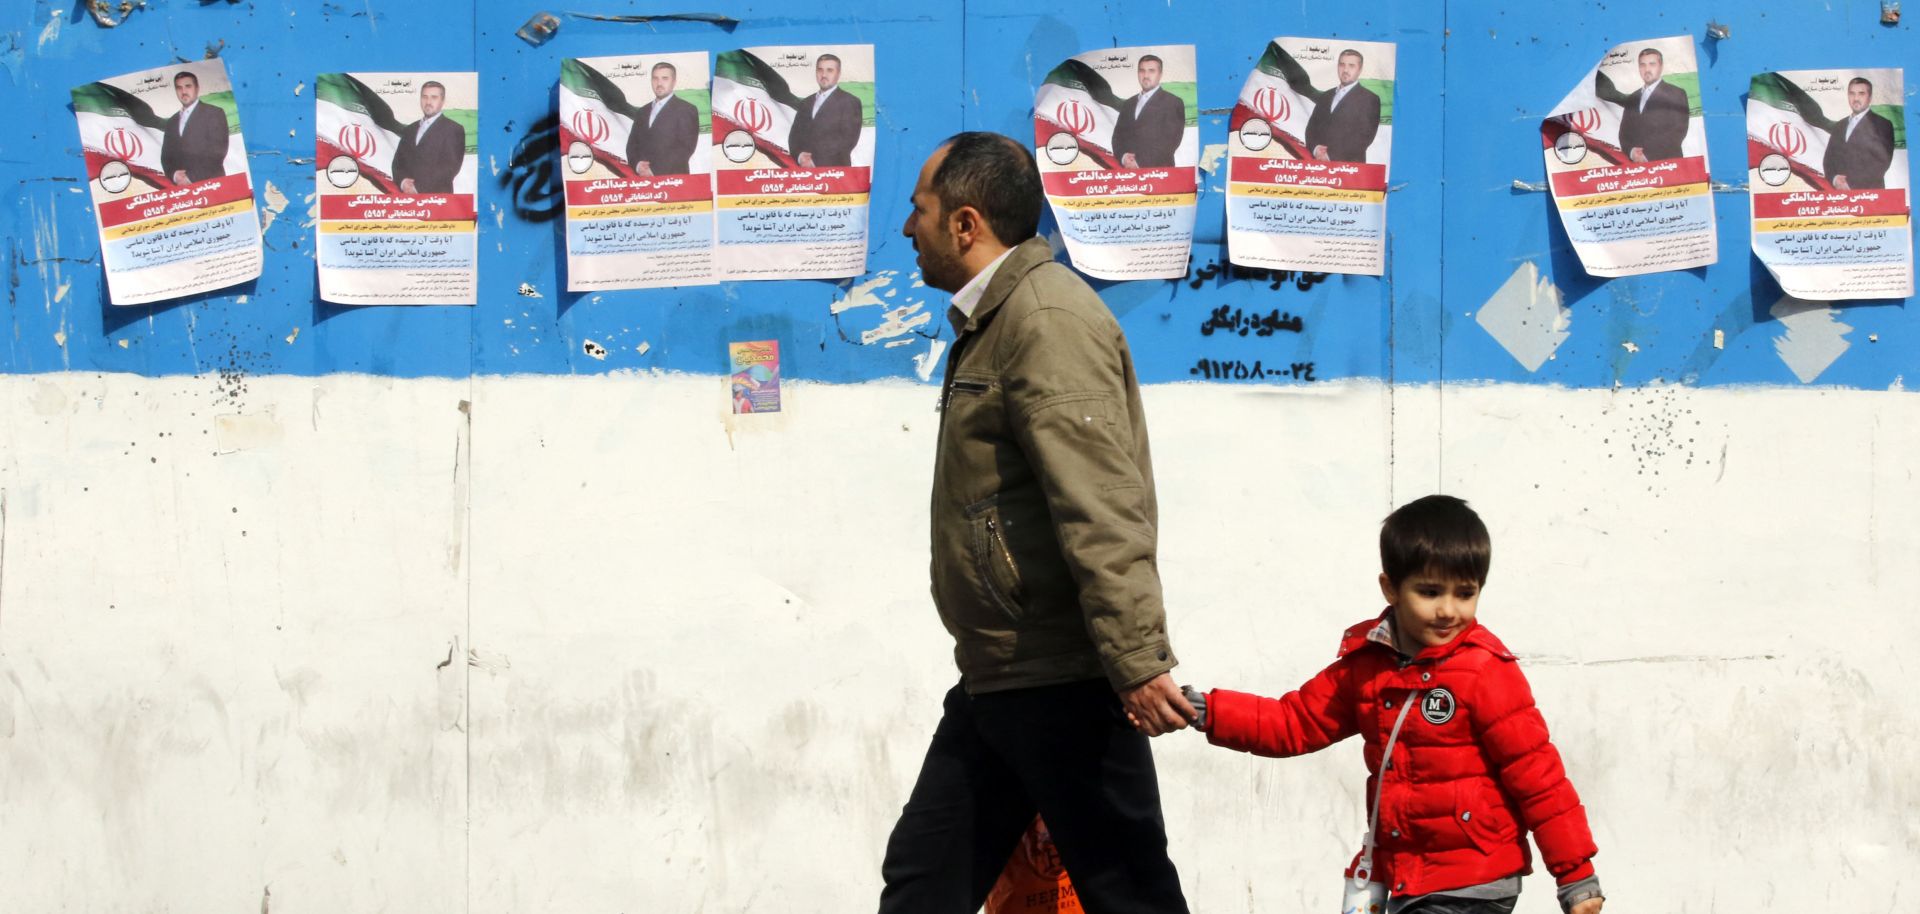 A man and a child walk past electoral campaign posters in Tehran, Iran, on Feb. 22, 2024, ahead of next month's elections.